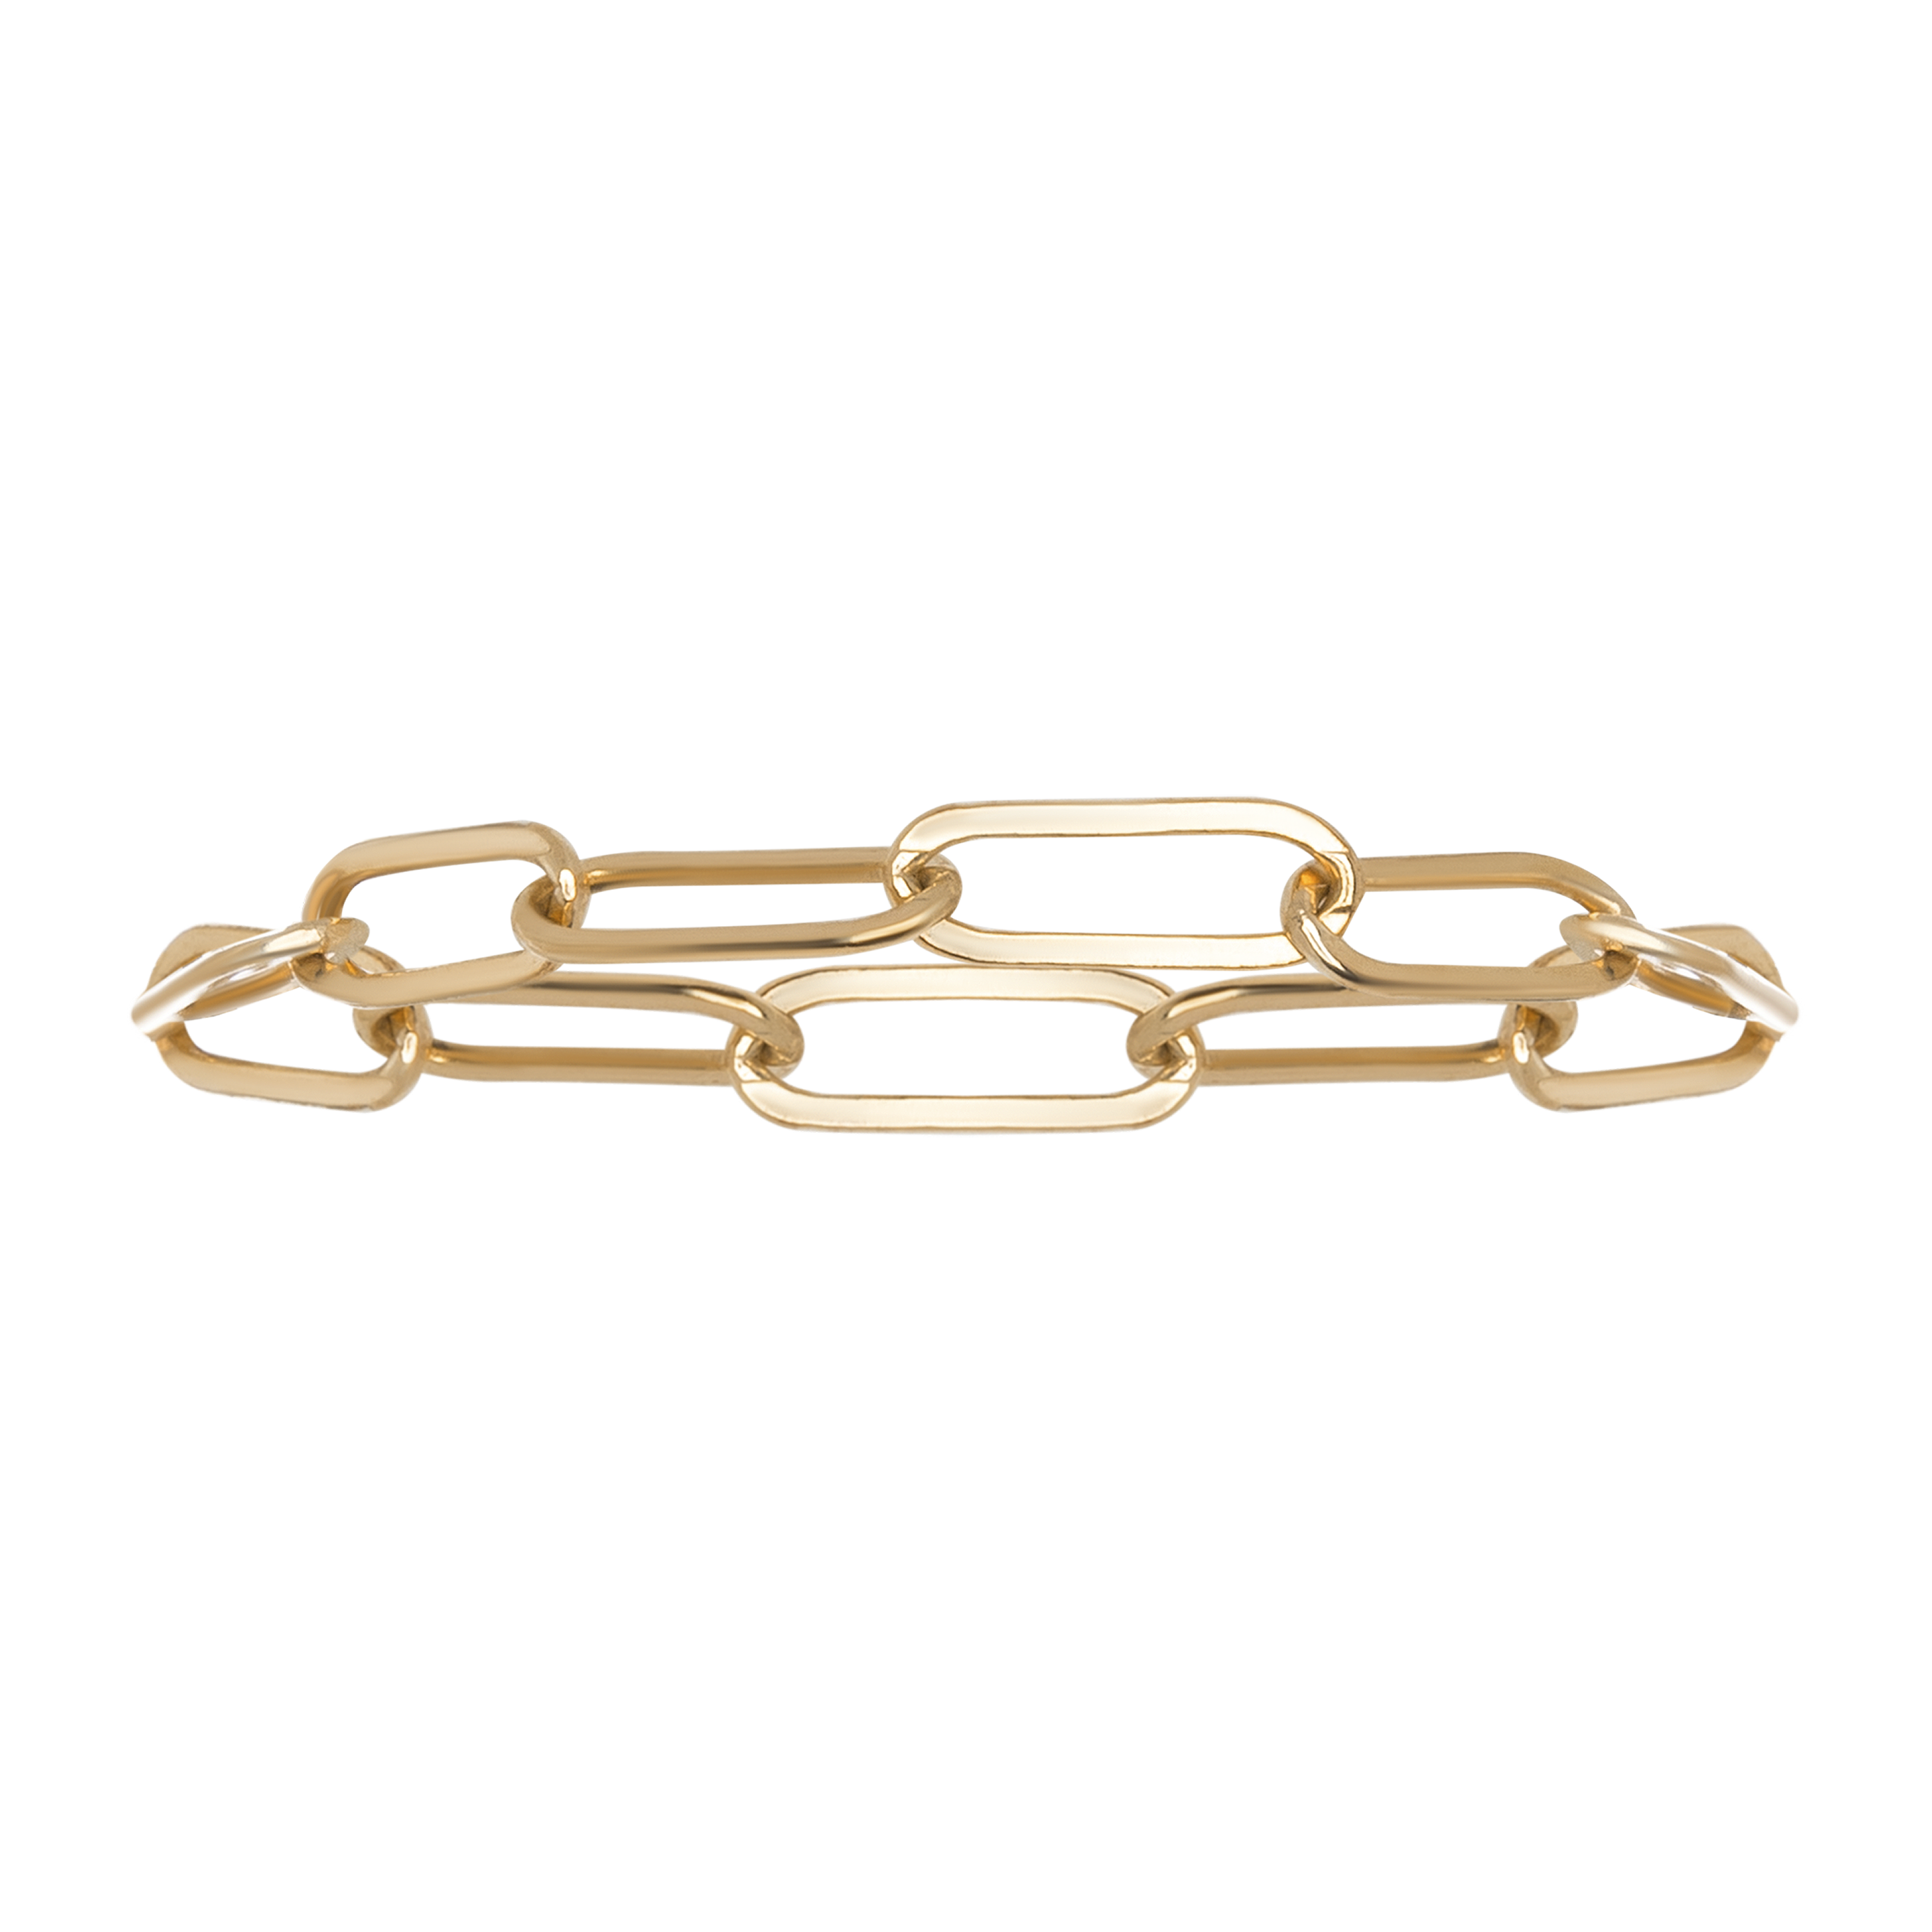 Gold Chain Ring